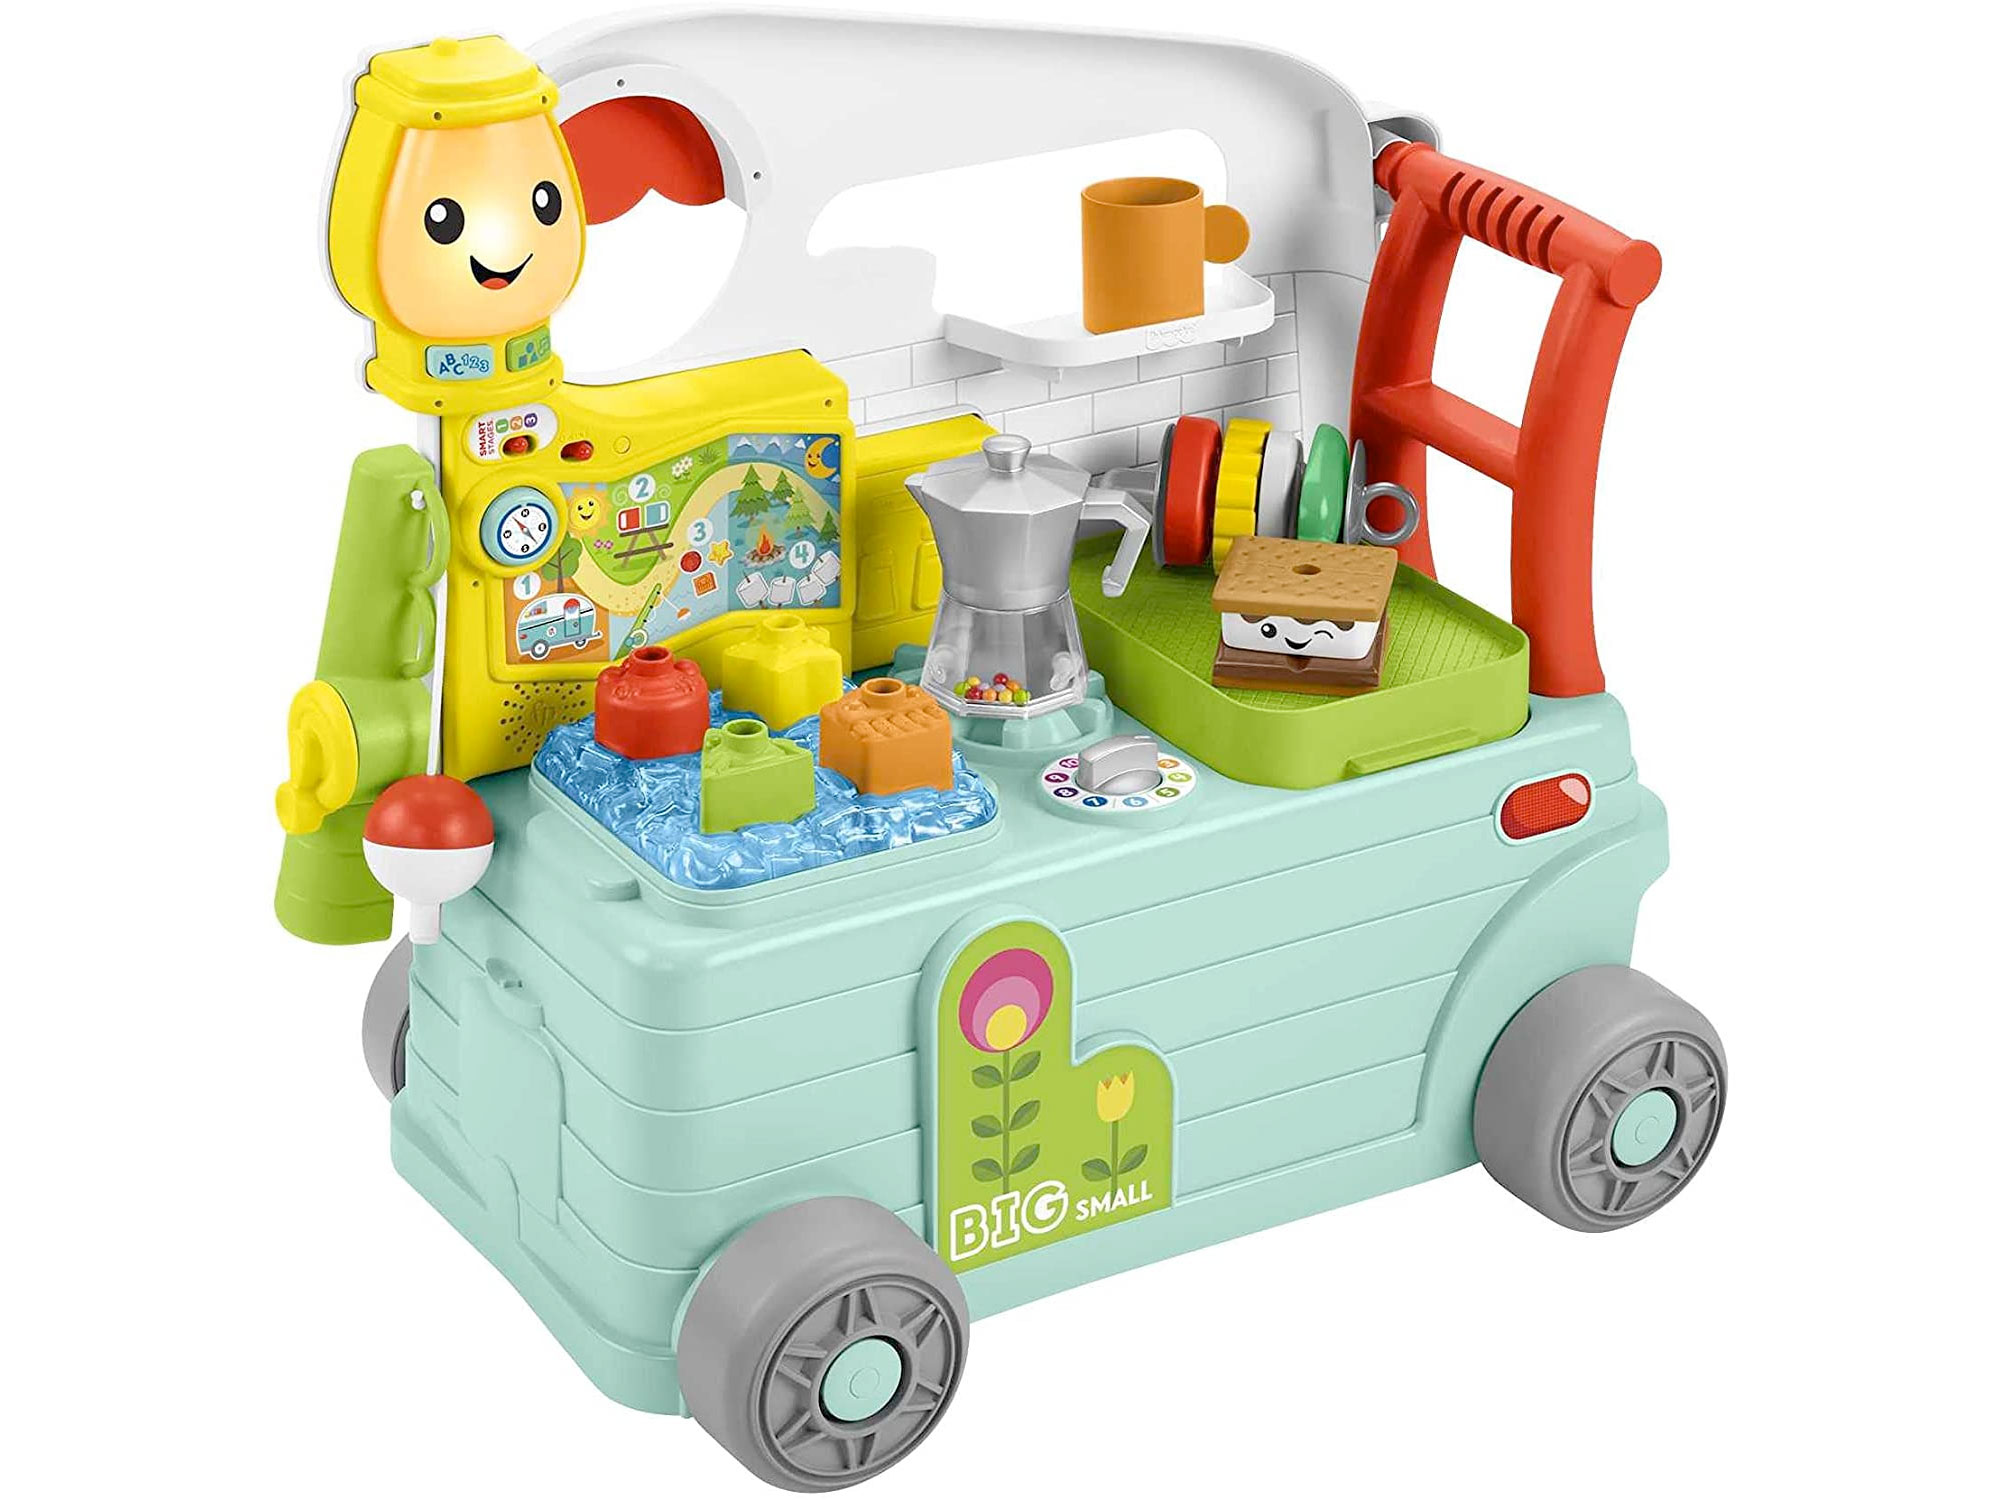 Amazon：Fisher-Price Laugh & Learn 3-in-1 On-The-Go Camper只賣$47.98(只限Amazon Prime會員)